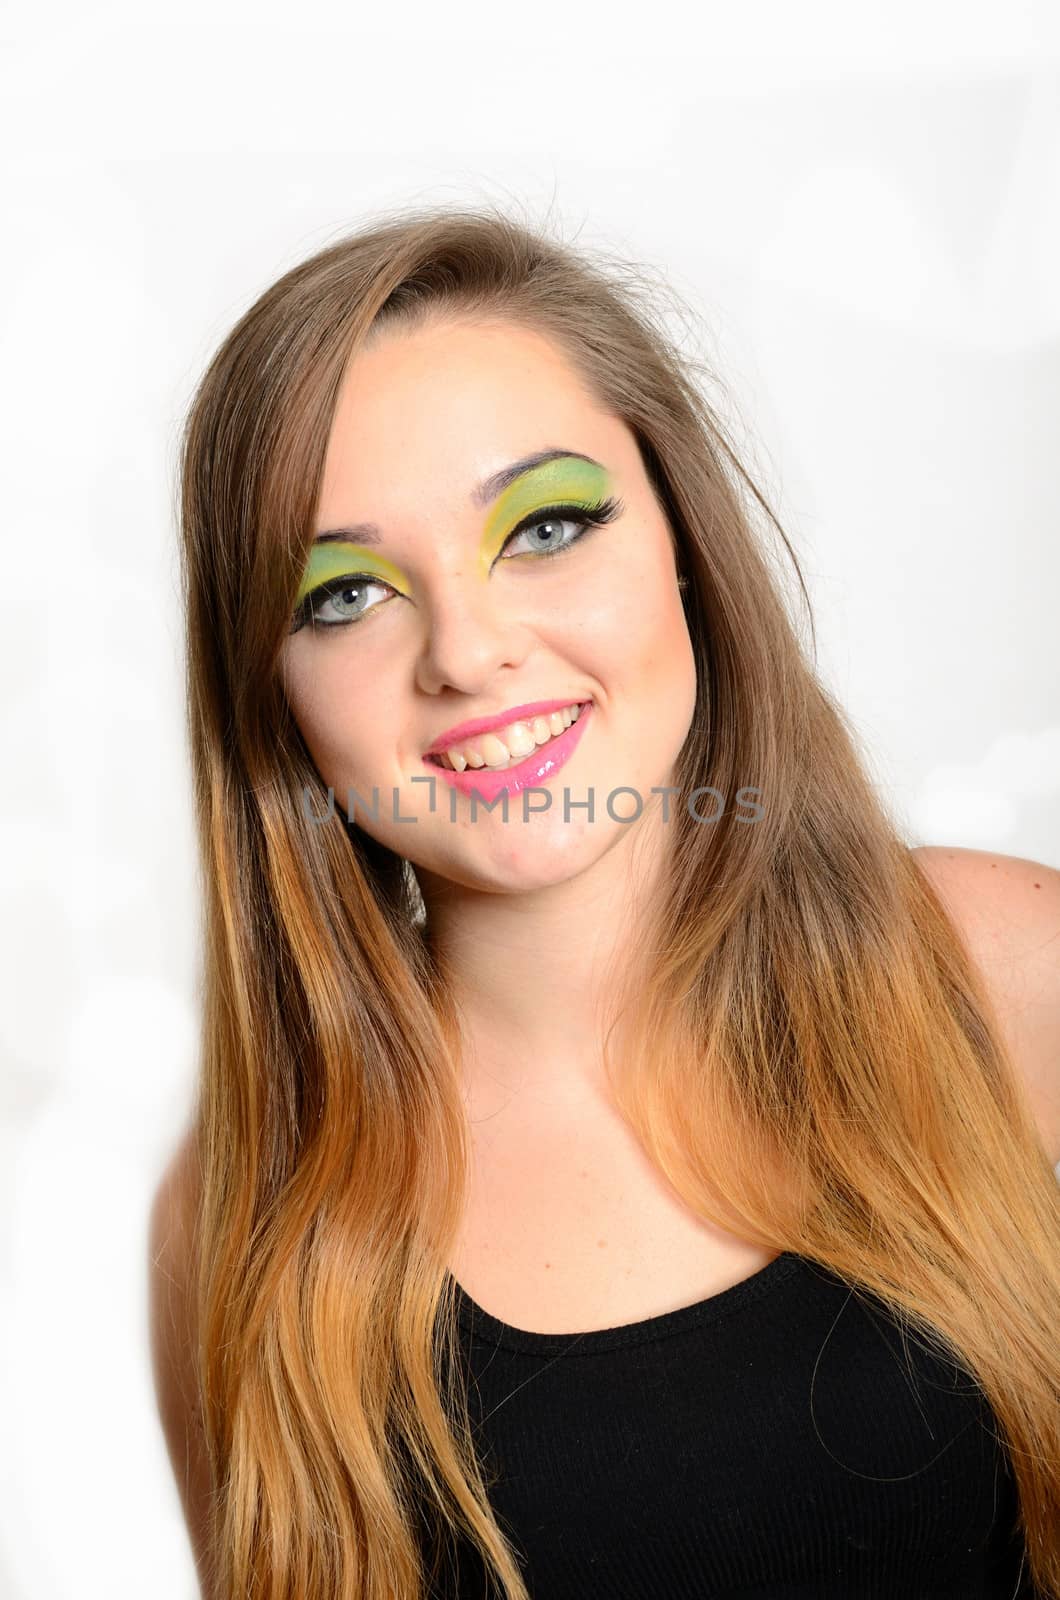 Close up portrait of young female model with blond hairs. Teenager from Poland, smiling face and colorful makeup.